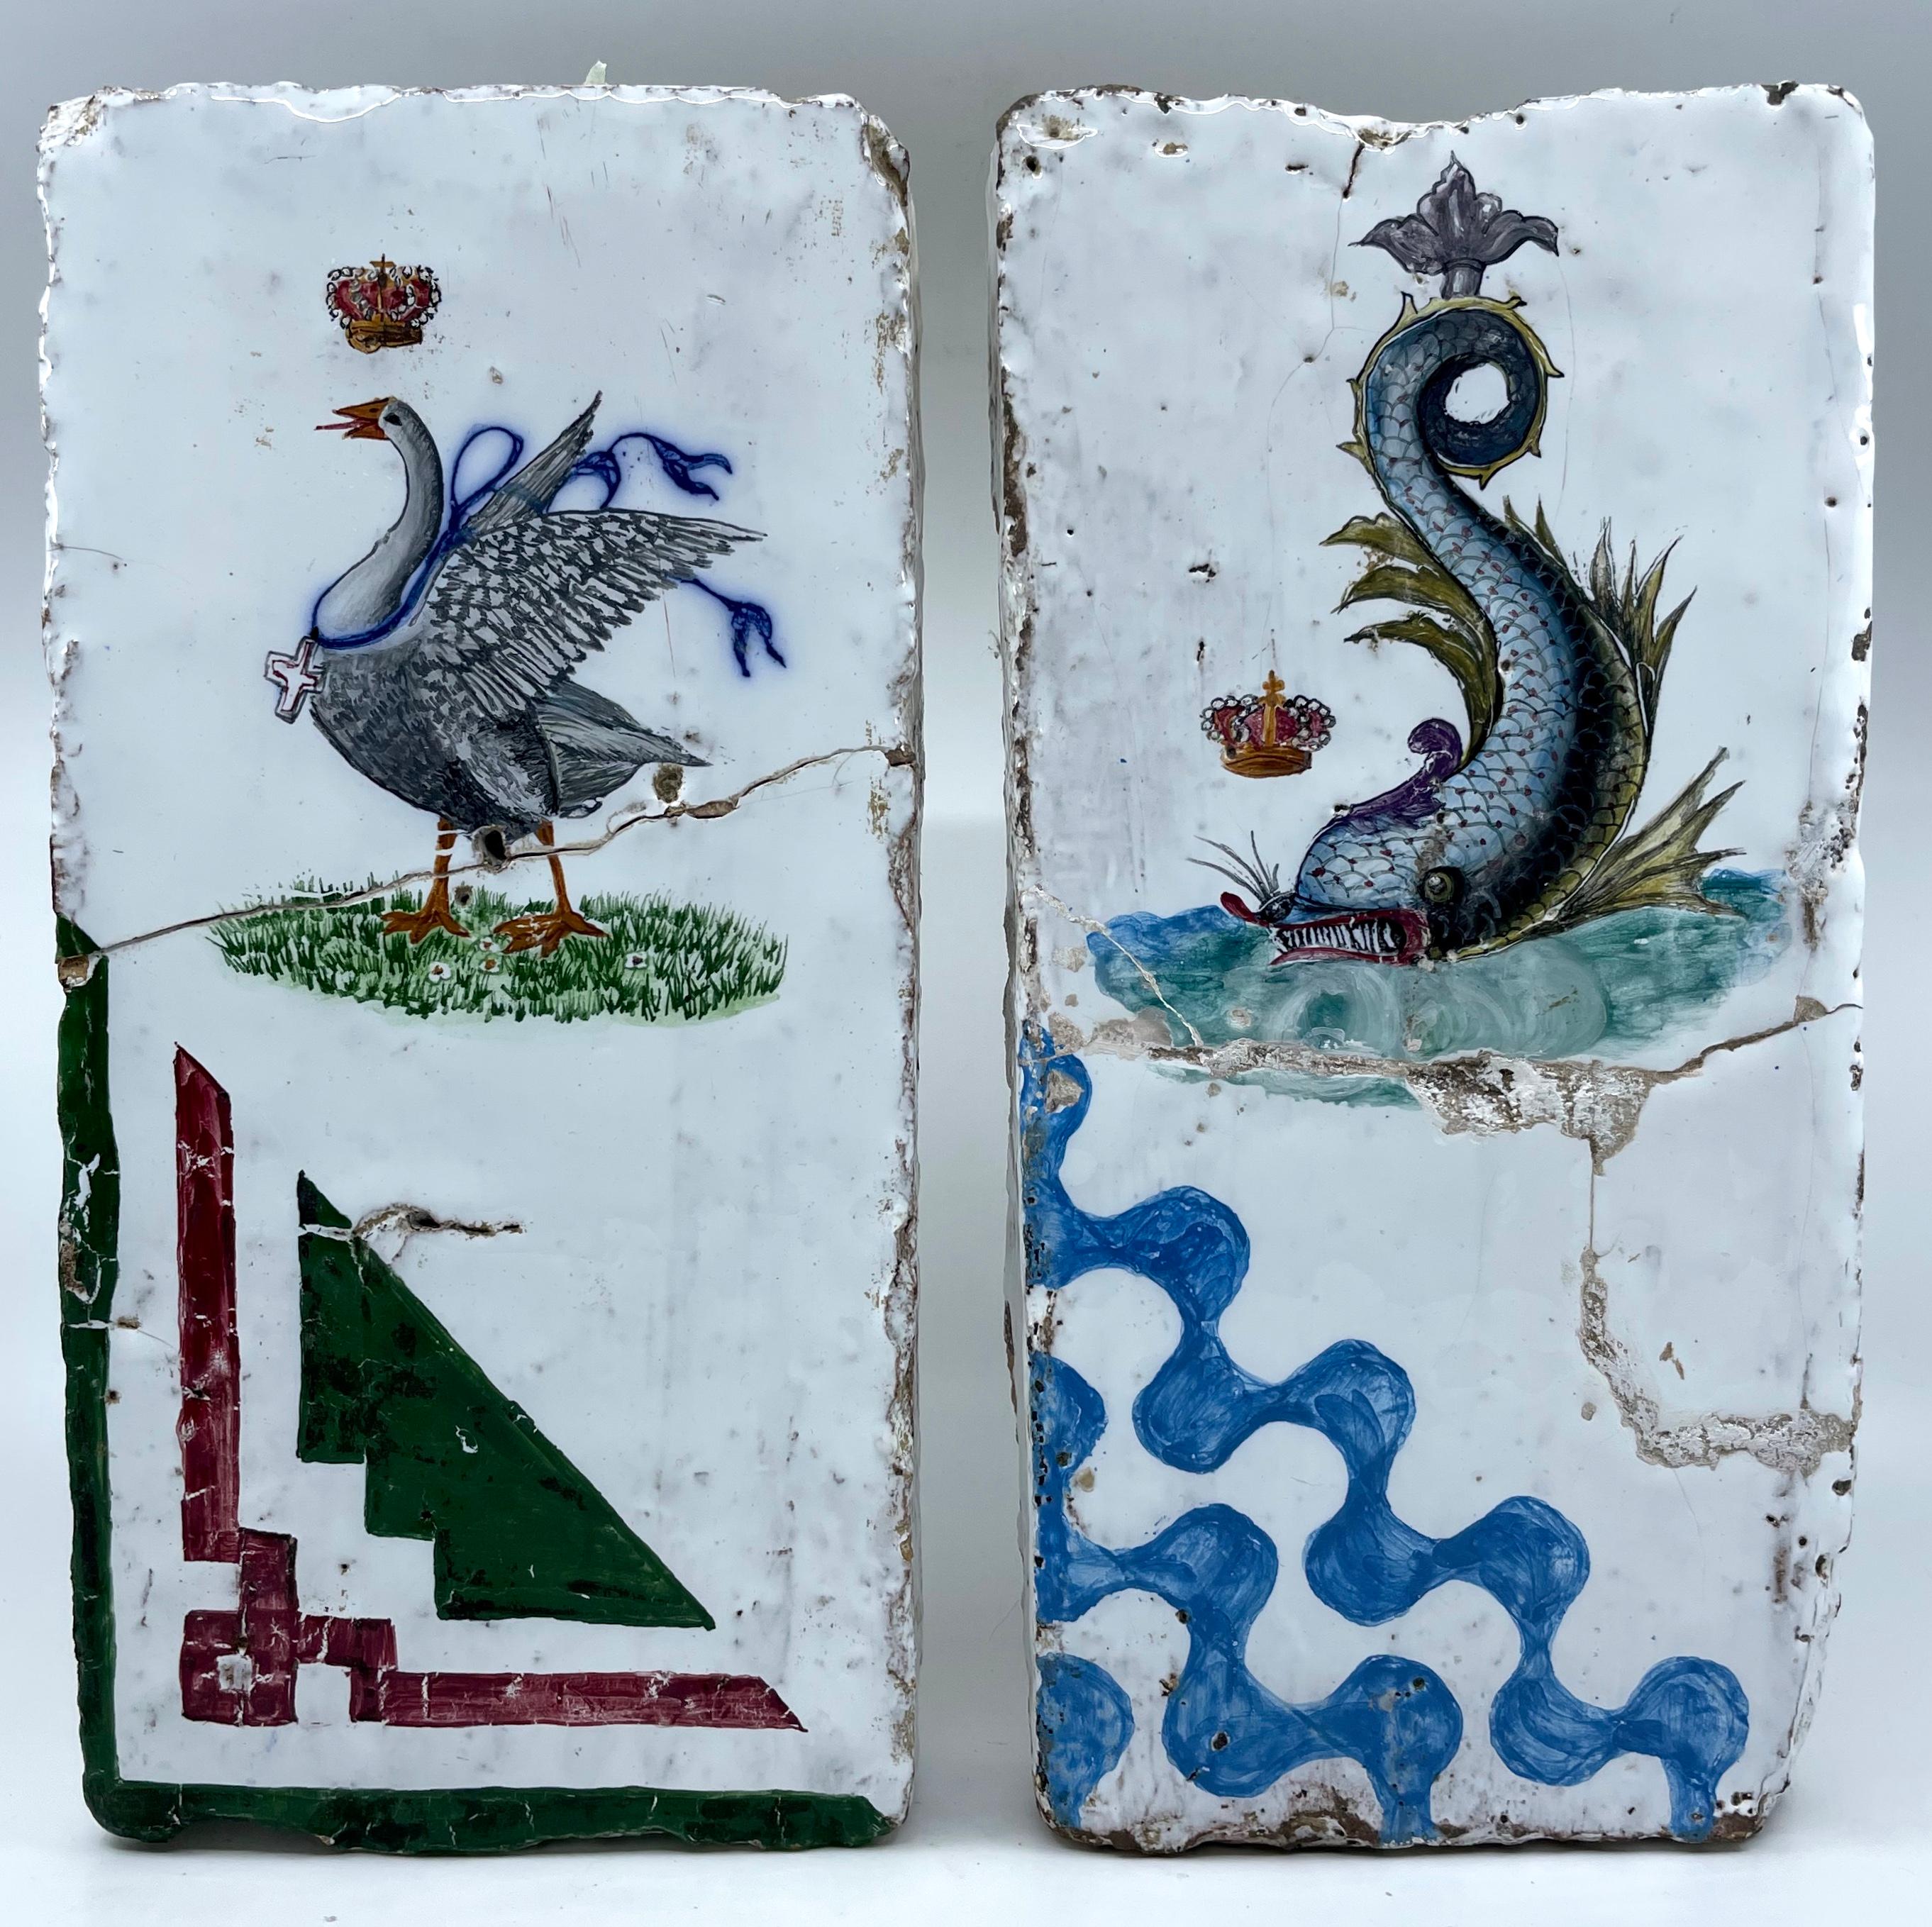 Palio horse race goose emblem. Vintage Forties glazed terracotta brick with the goose emblem of the Oca contrada racing team of Siena. Hand painted and glazed with crowned goose and red and green racing colours. Italy, 1940’s
Dimensions: 12.25” H x